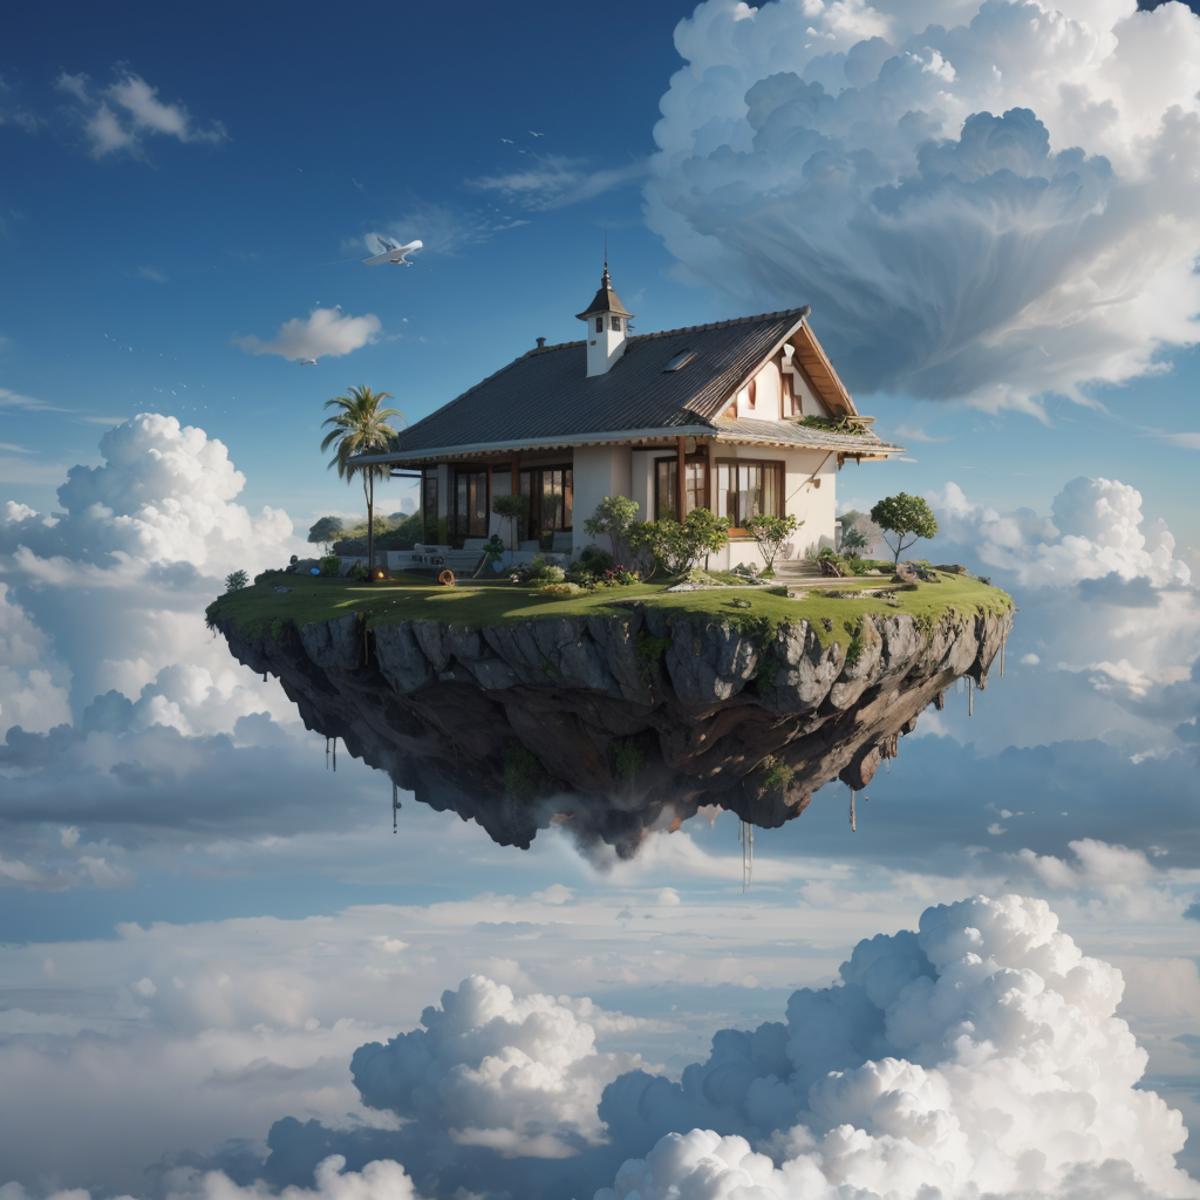 Floating Islands image by Mugsy